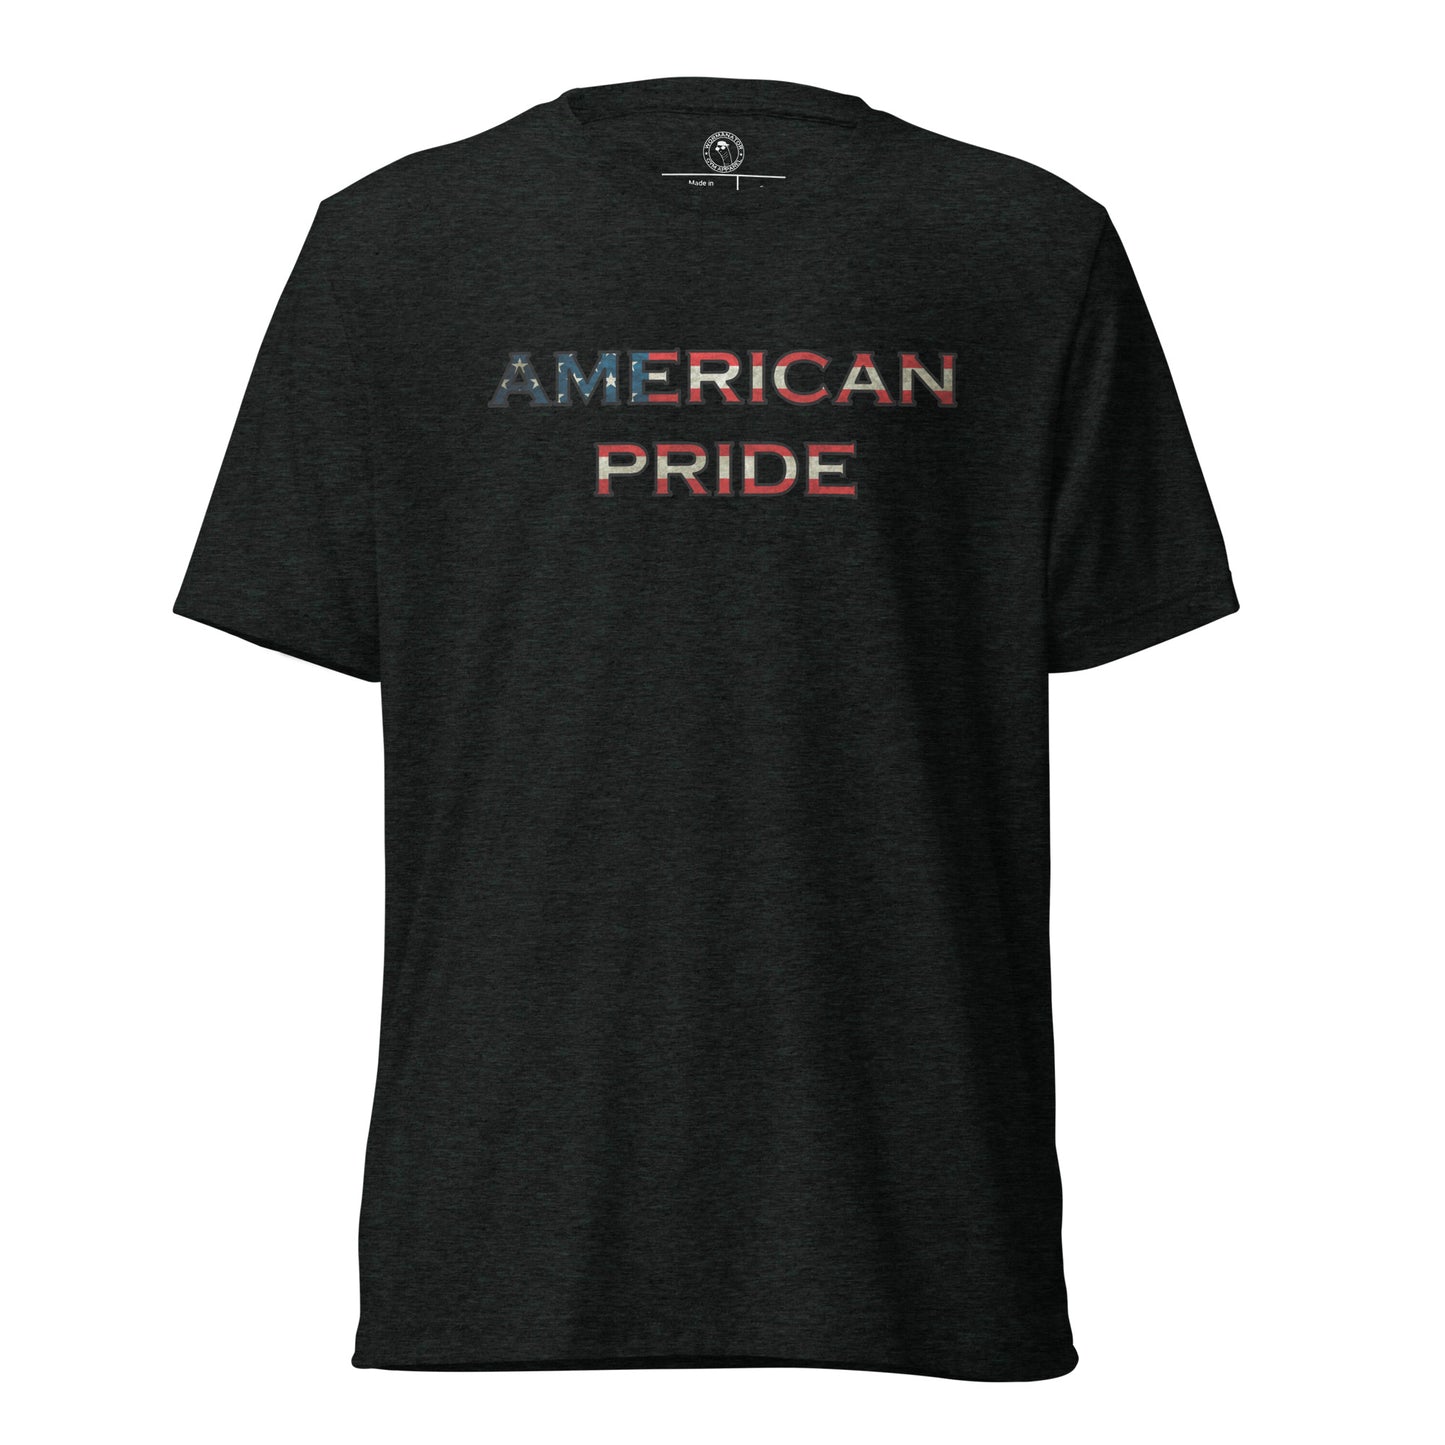 American Pride T-Shirt in Charcoal Black Triblend